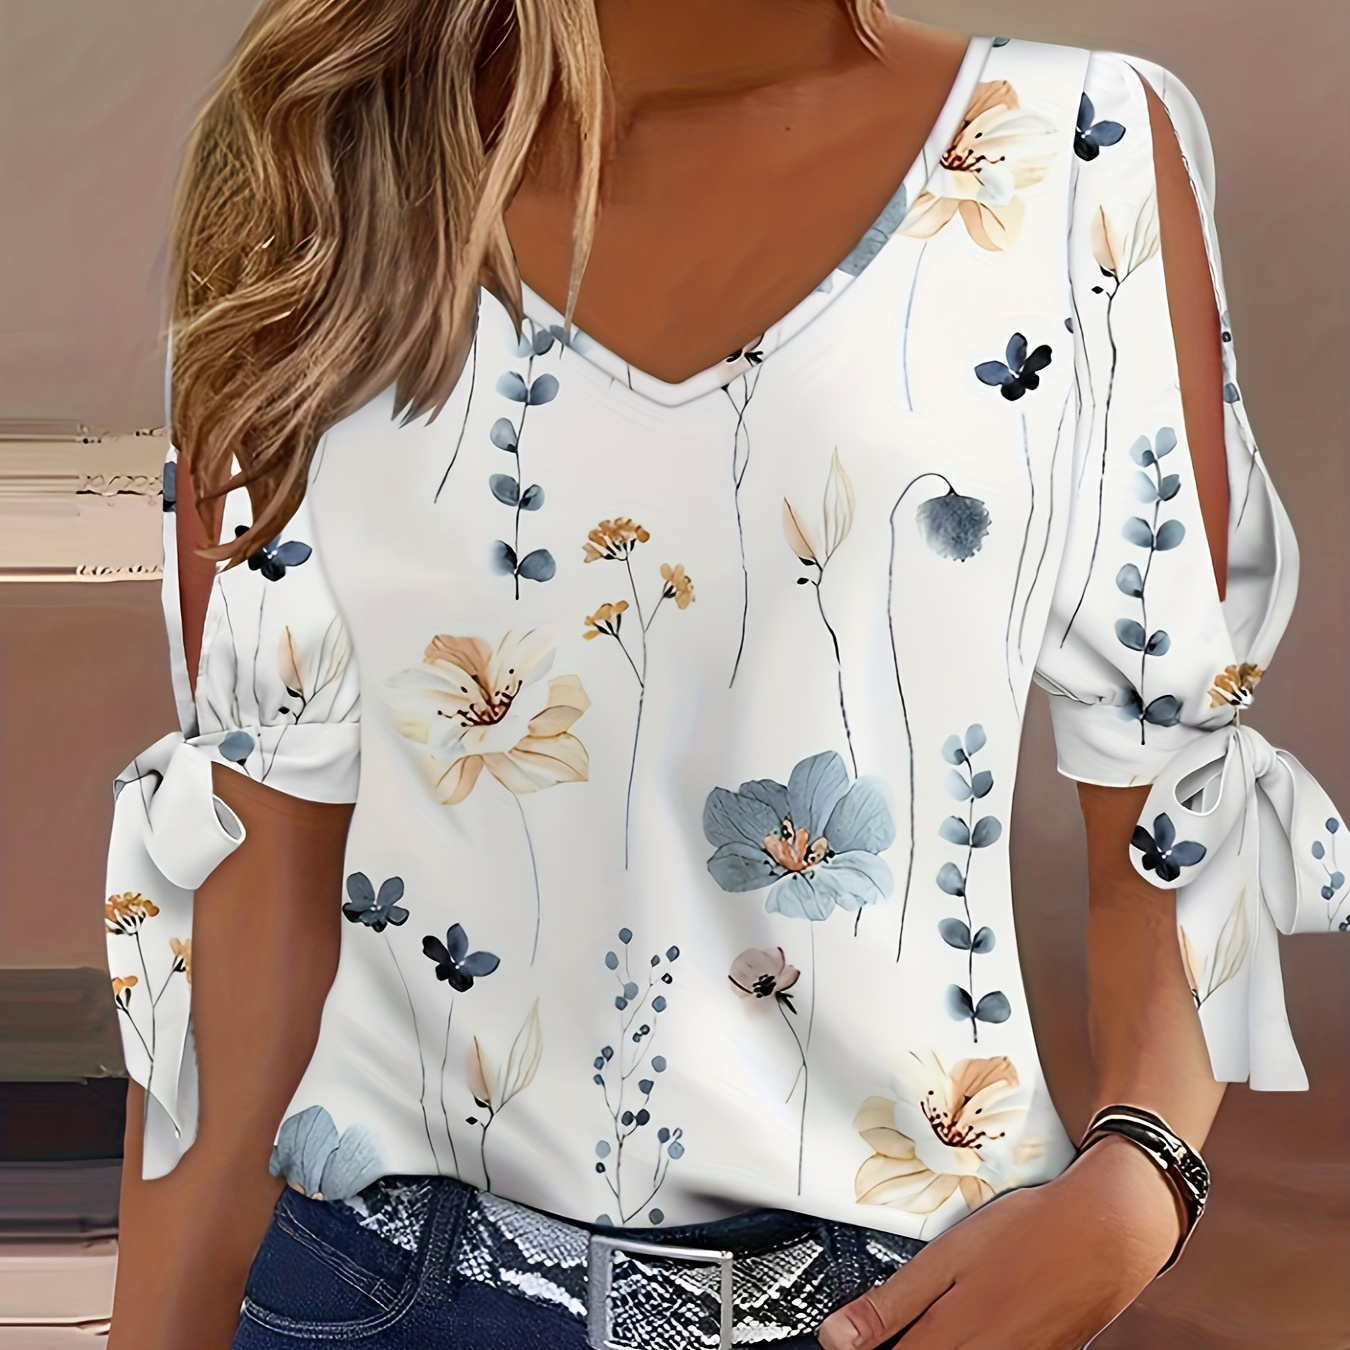 

Floral Print Knotted T-shirt, Casual V Neck Split Short Sleeve T-shirt, Women's Clothing